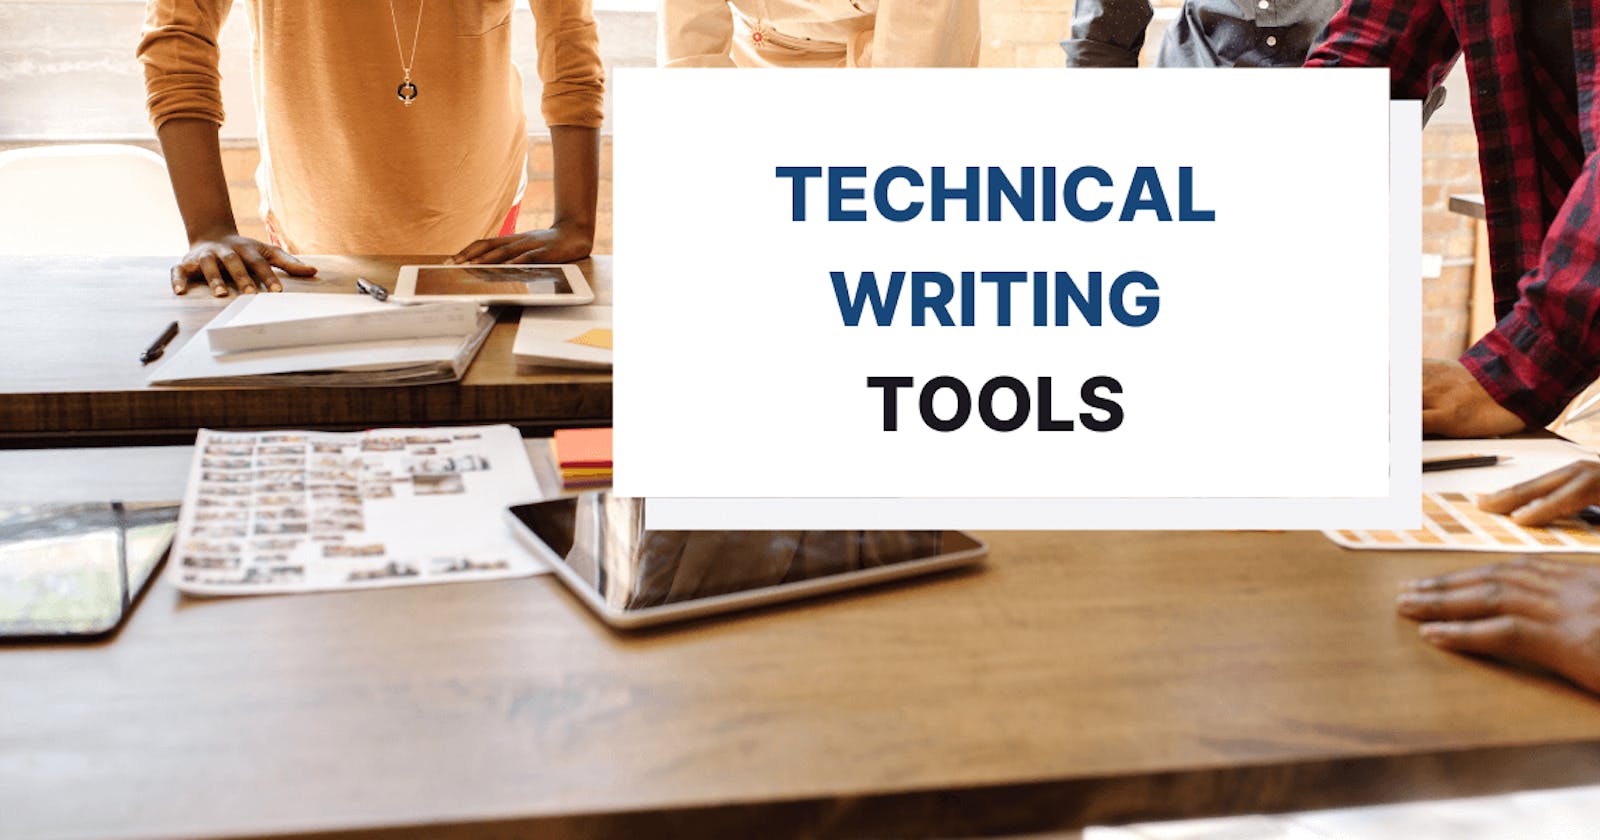 Helpful Online Tools To Self Improve As a Technical Writer